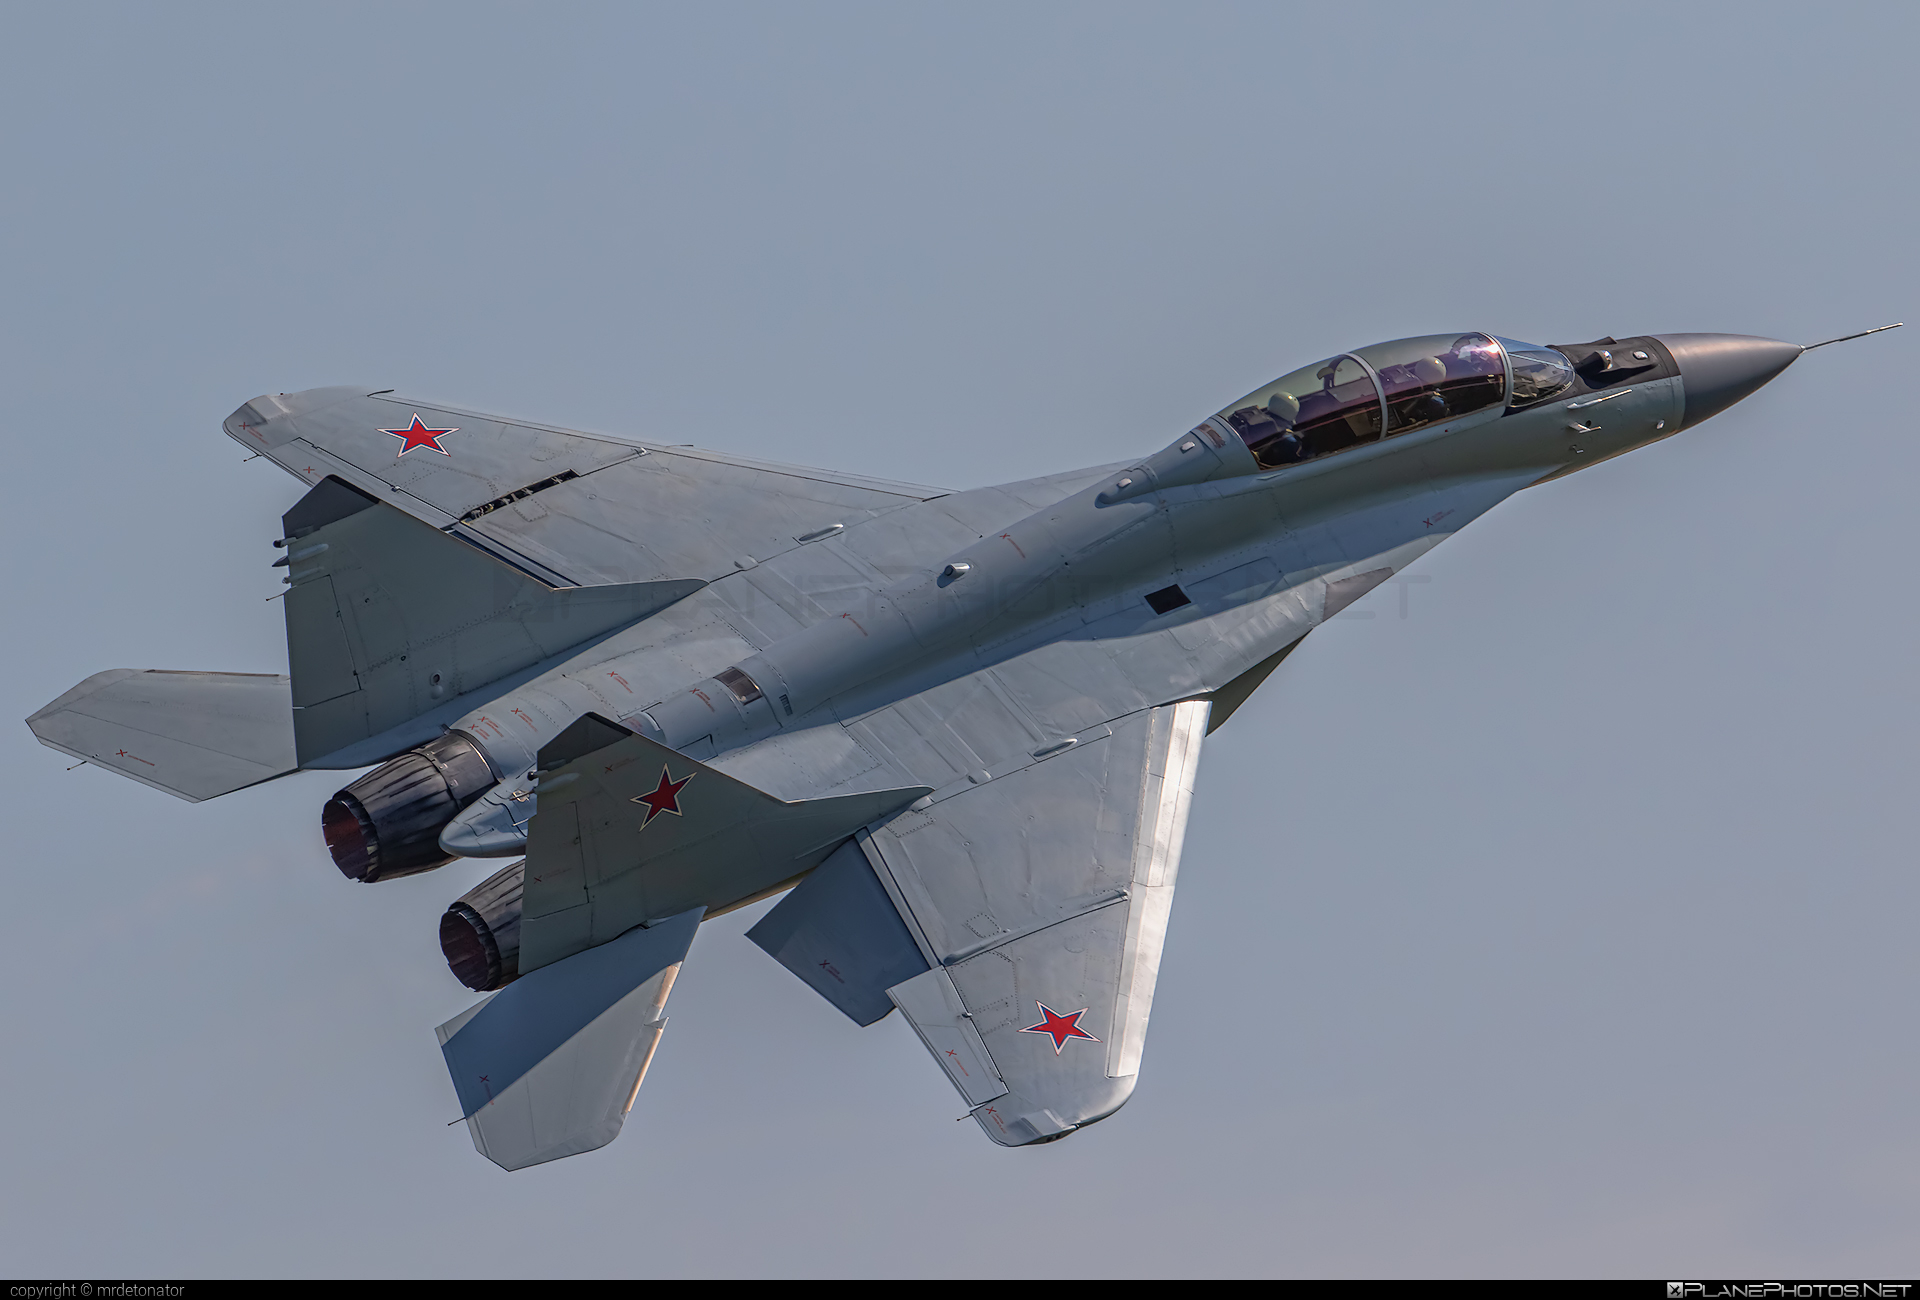 Mikoyan-Gurevich MiG-29M2 - 747 operated by RSK MiG #maks2019 #mig #mig29 #mig29m2 #mikoyangurevich #rskmig